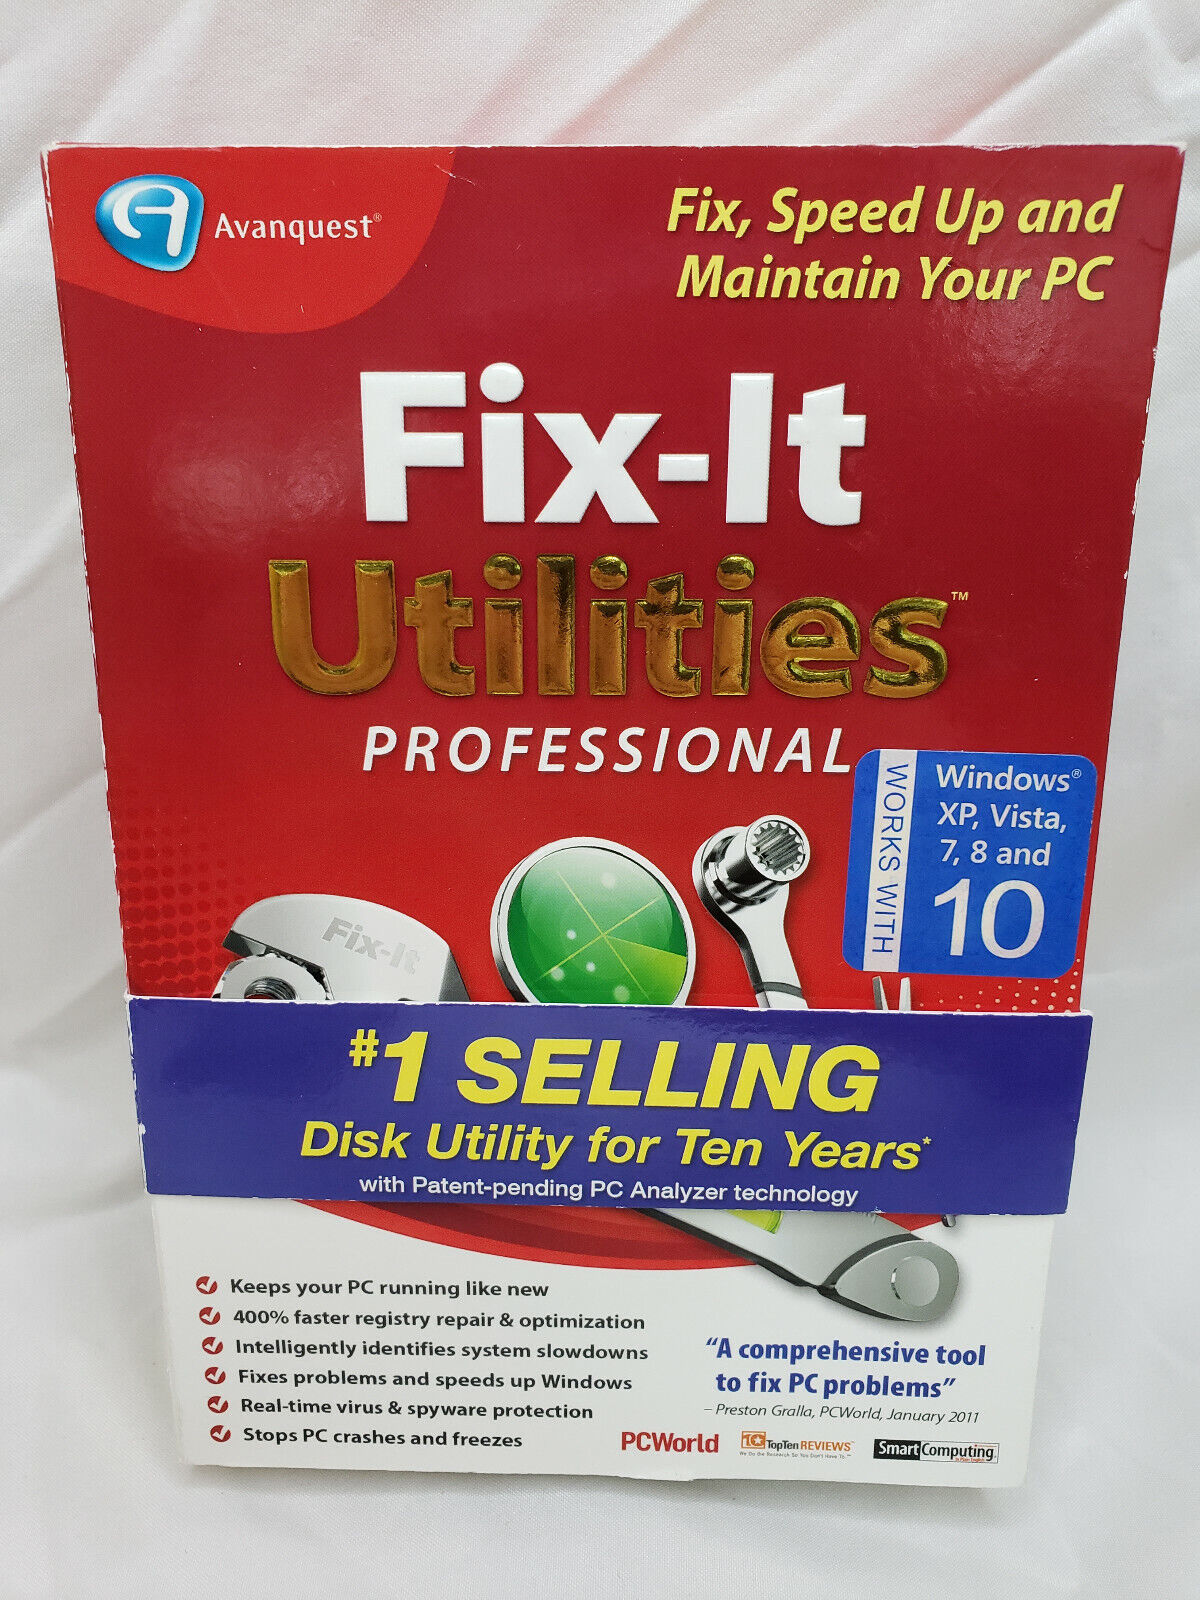 Fix-It Utilities Professional 5 Pc License #1 Selling Disk Utility Sealed      